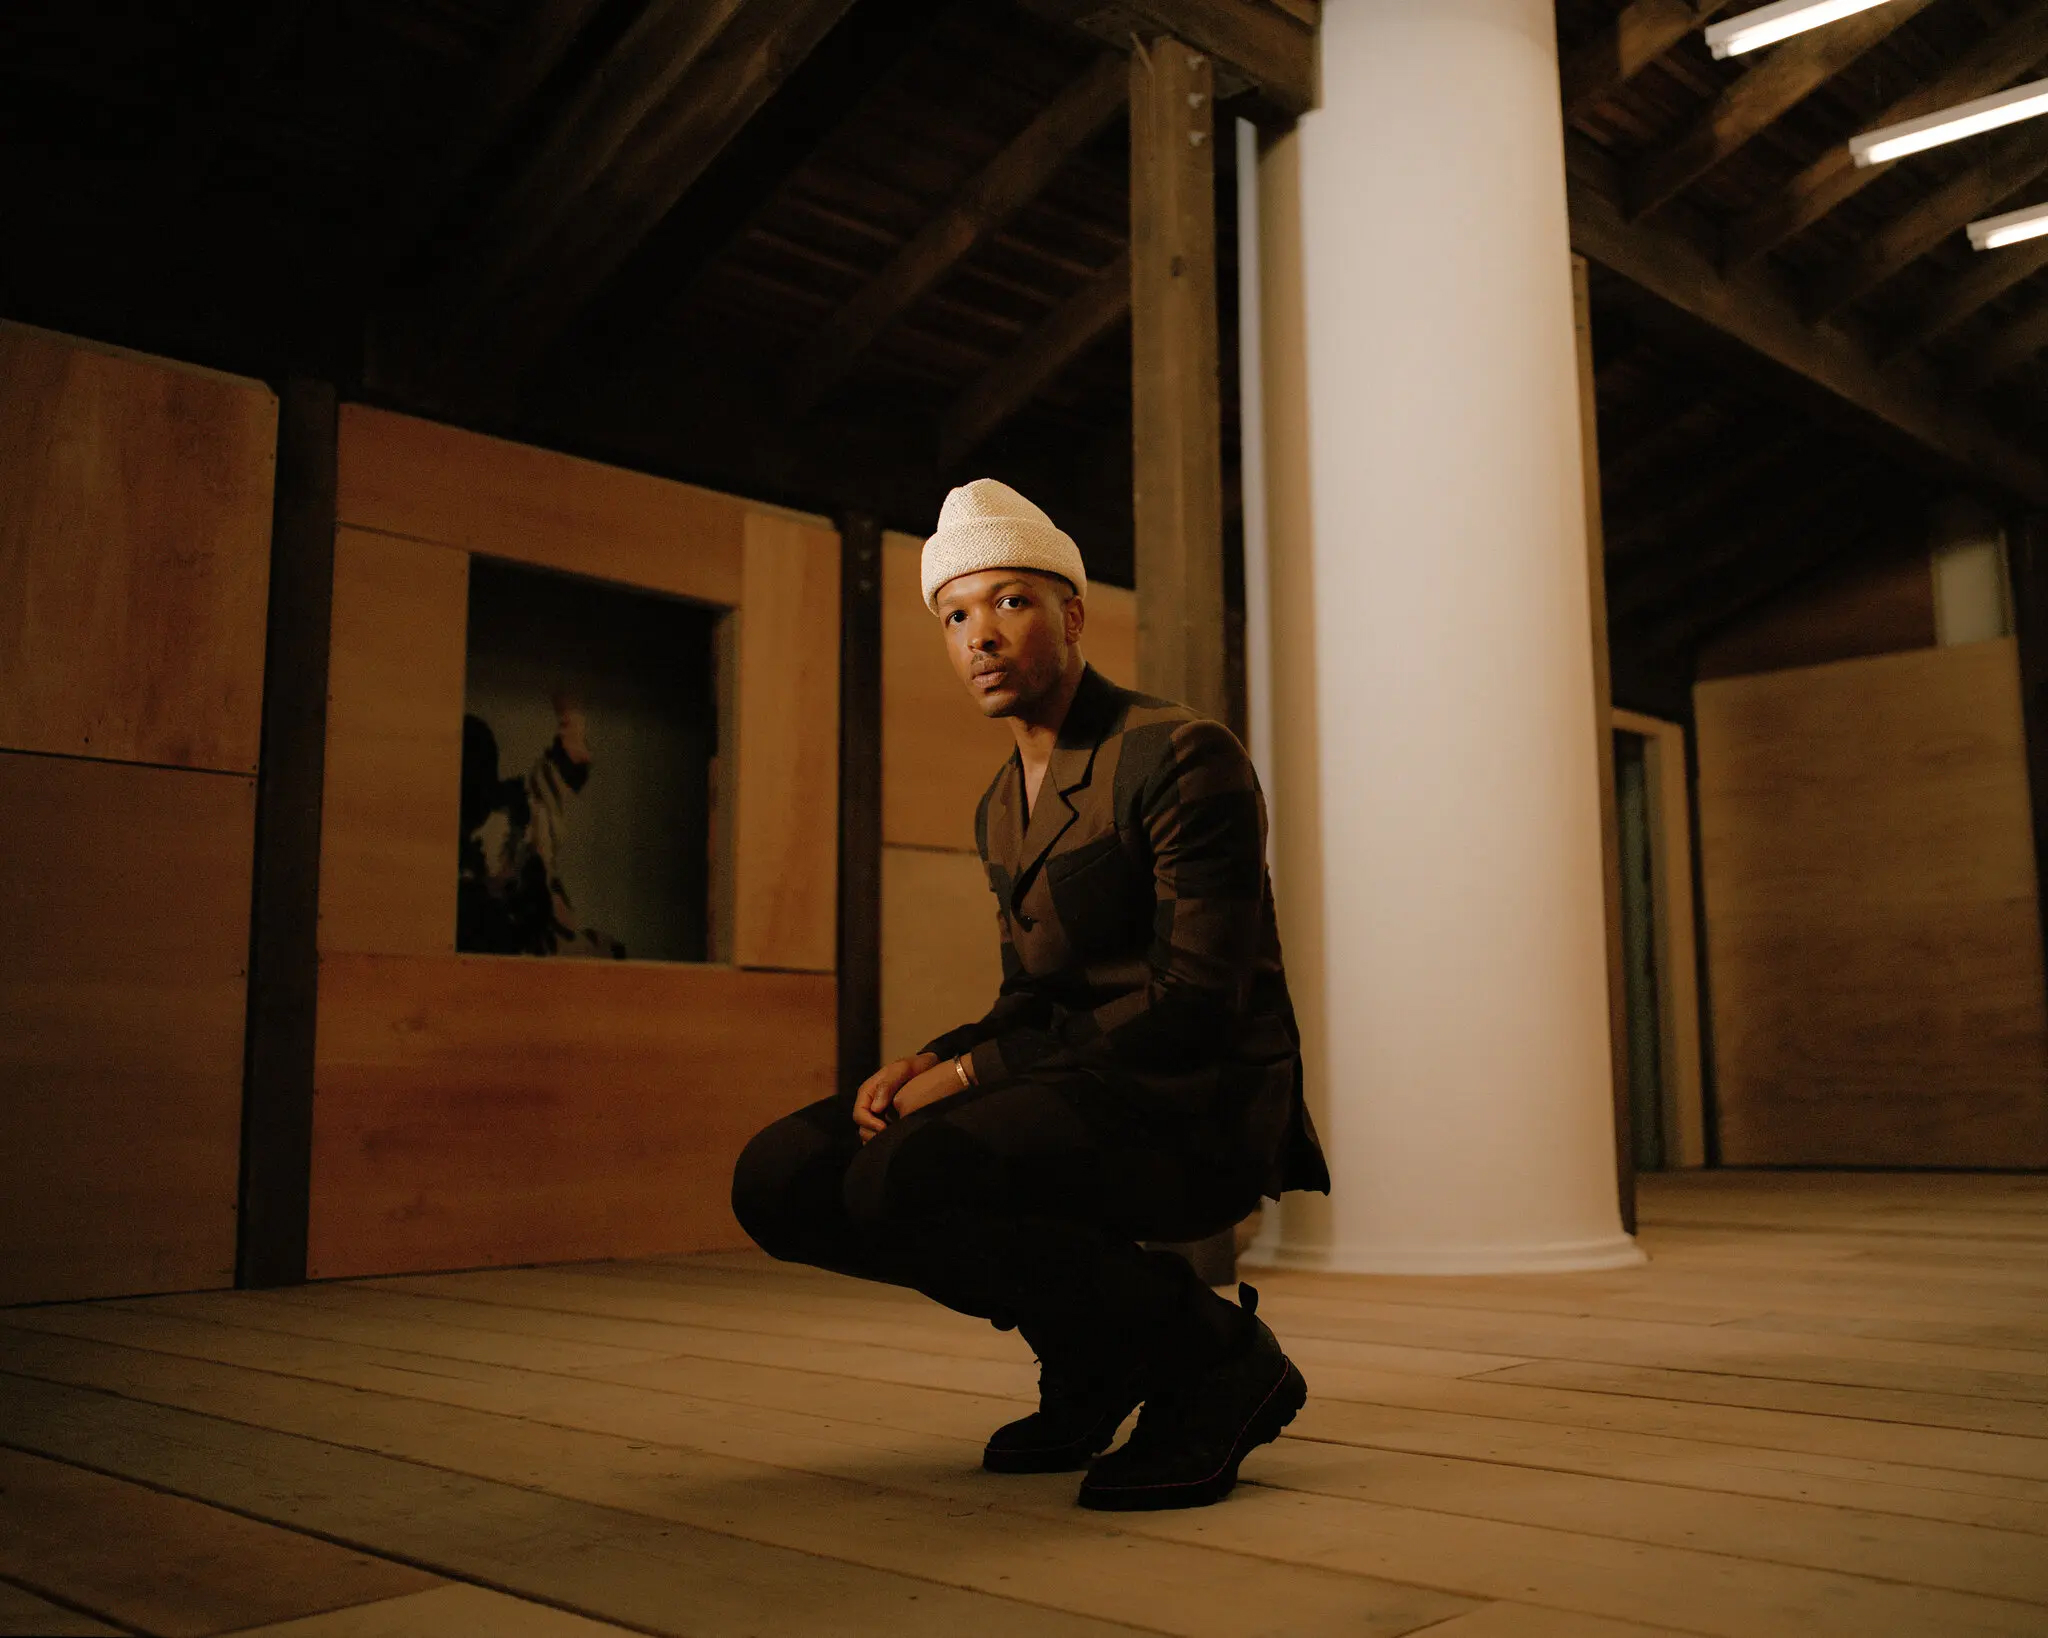 Portrait of Antwaun Sargent crouching in a gallery space, looking directly at the camera.